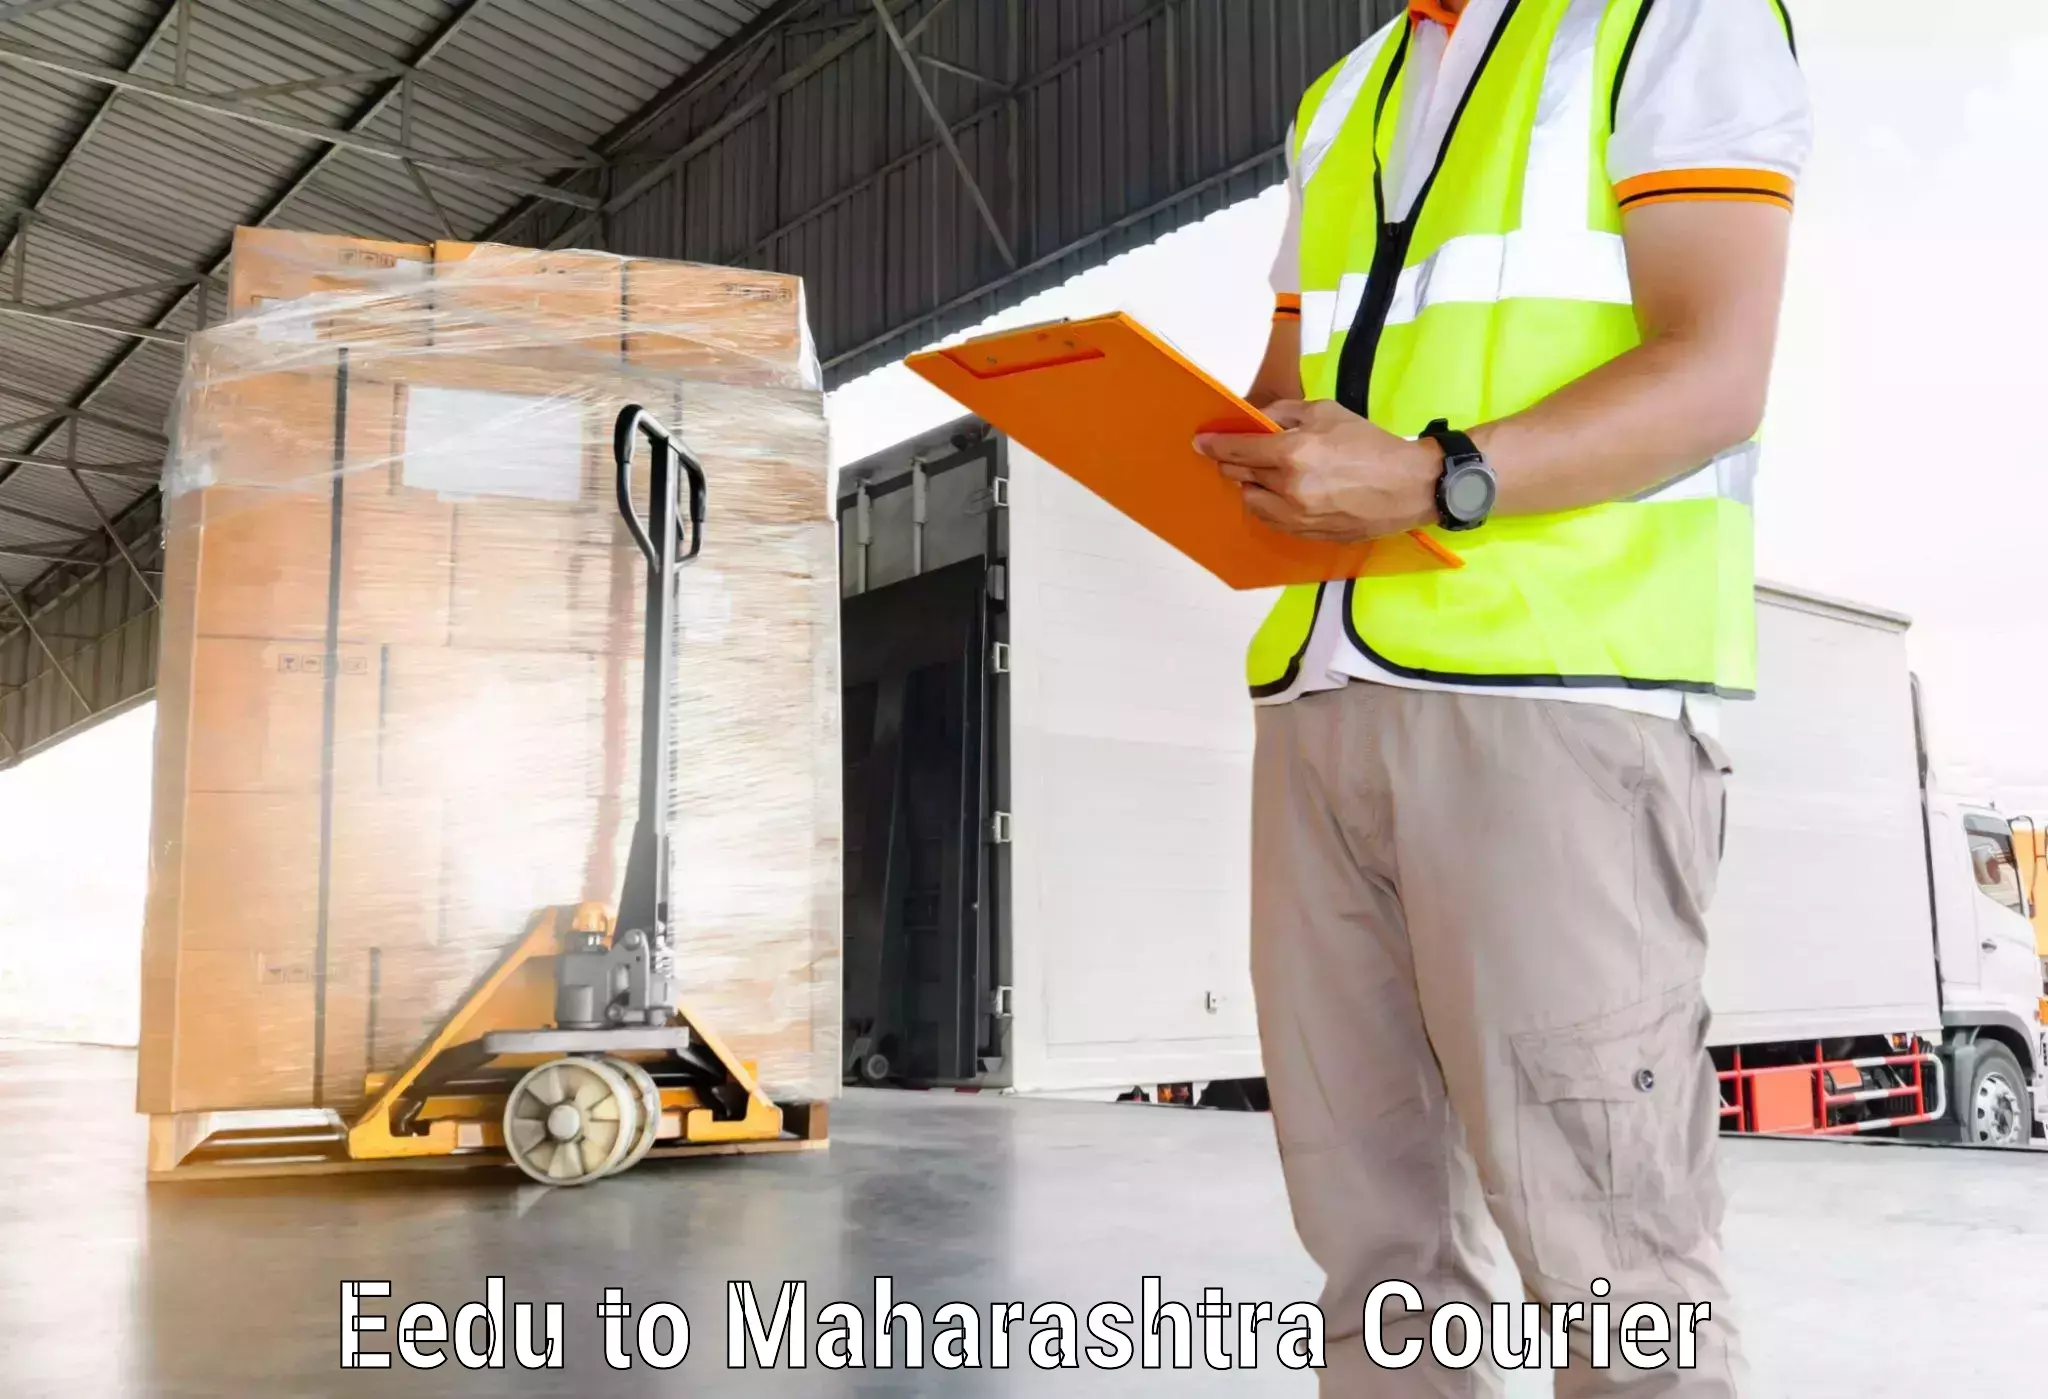 Courier service innovation Eedu to Greater Thane